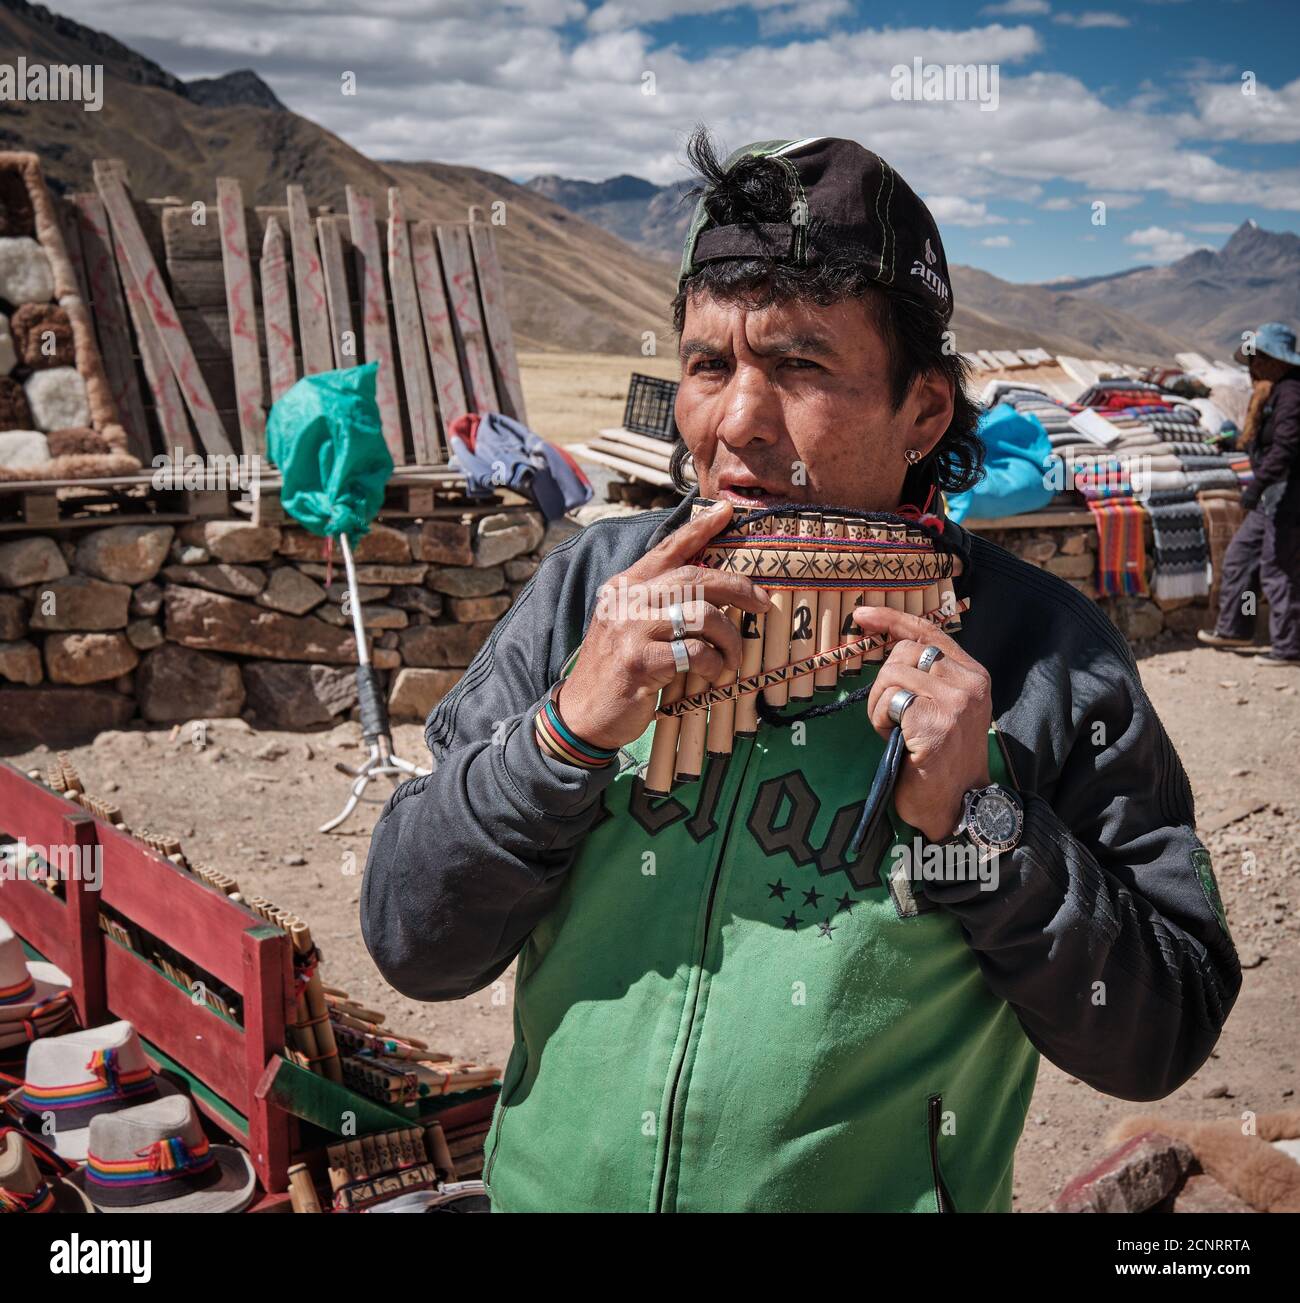 A market trader demonstrating pan pipes panpipes pan-pipes syrinx at a roadside market in the Altiplano high Andes, Peru, selling textiles and fabrics Stock Photo